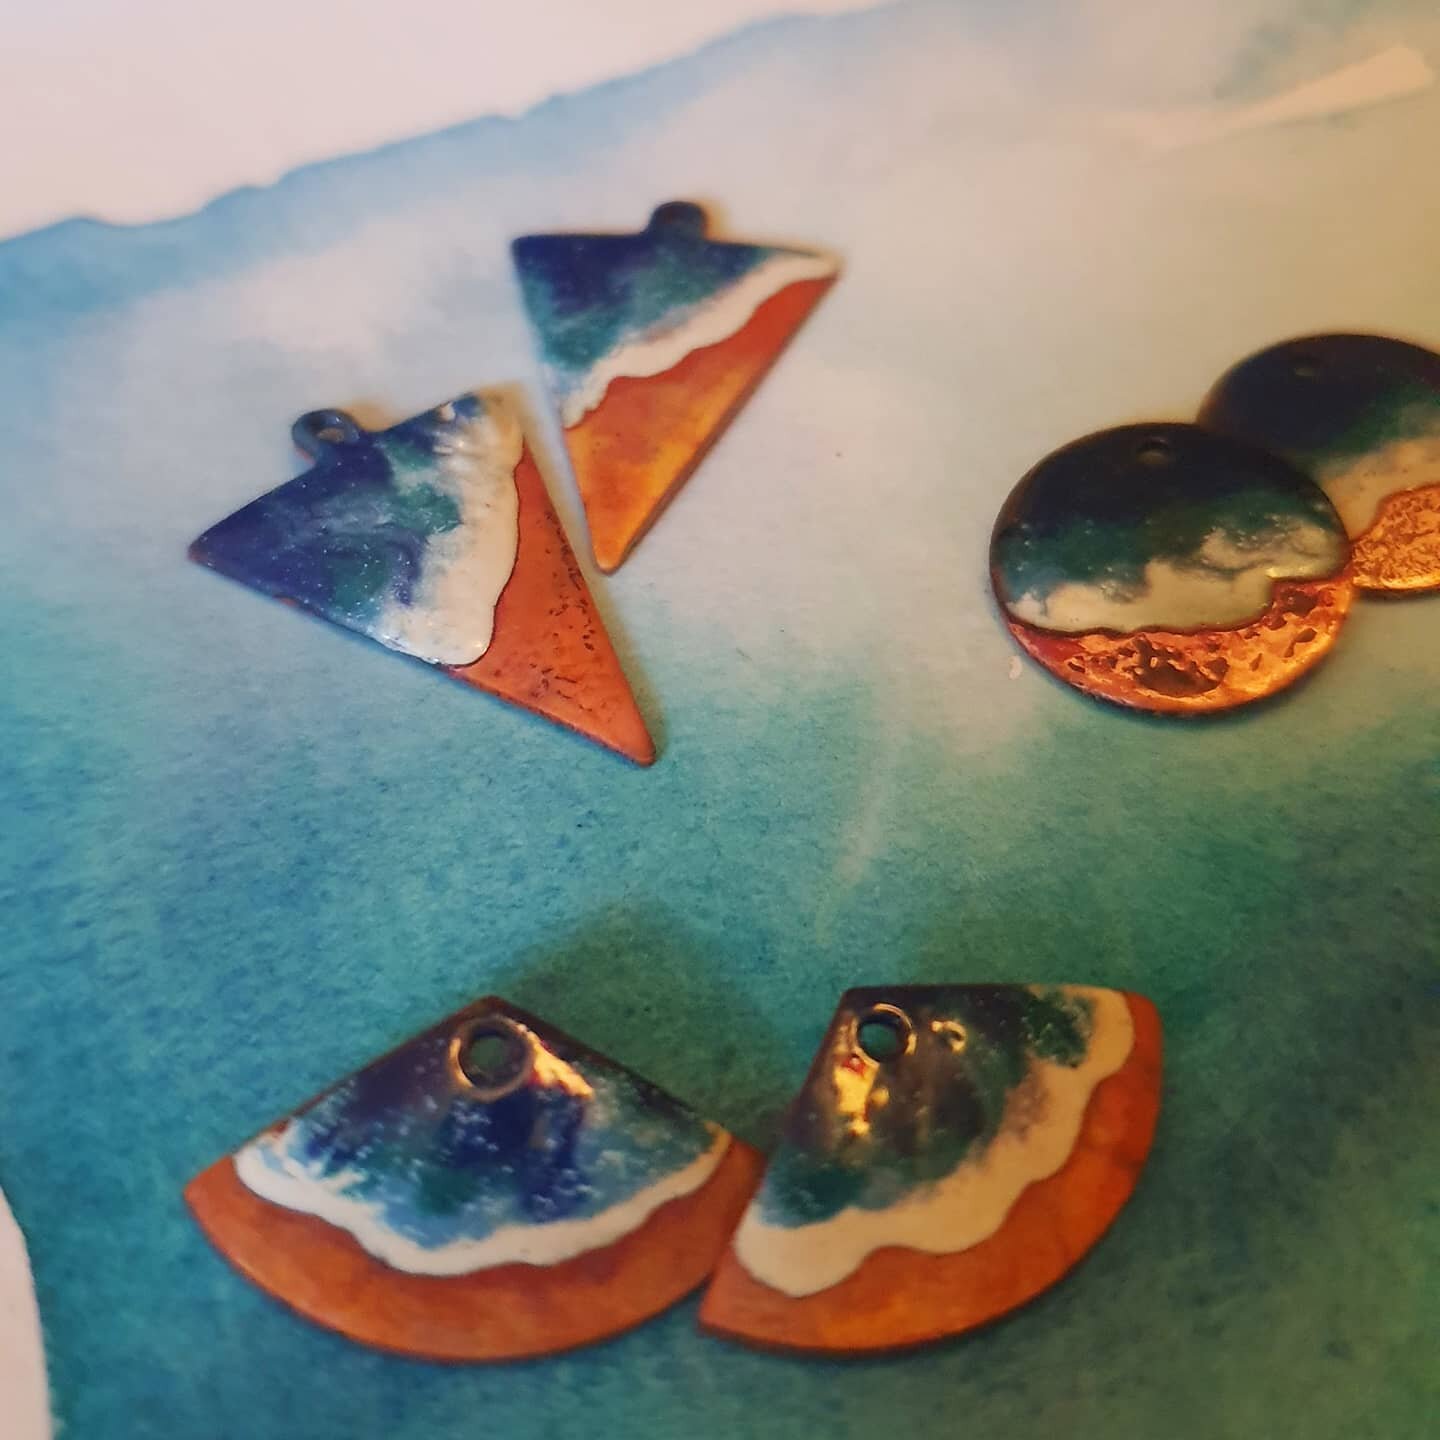 This week I have been busy replenishing my enamel seascape jewellery stock. These ones are fresh out of the kiln, just waiting to be polished up. 

#enamel #enamelart #enamelartist #kilnfired #enamelearrings #seaearrings #seainspiredjewellery #handma